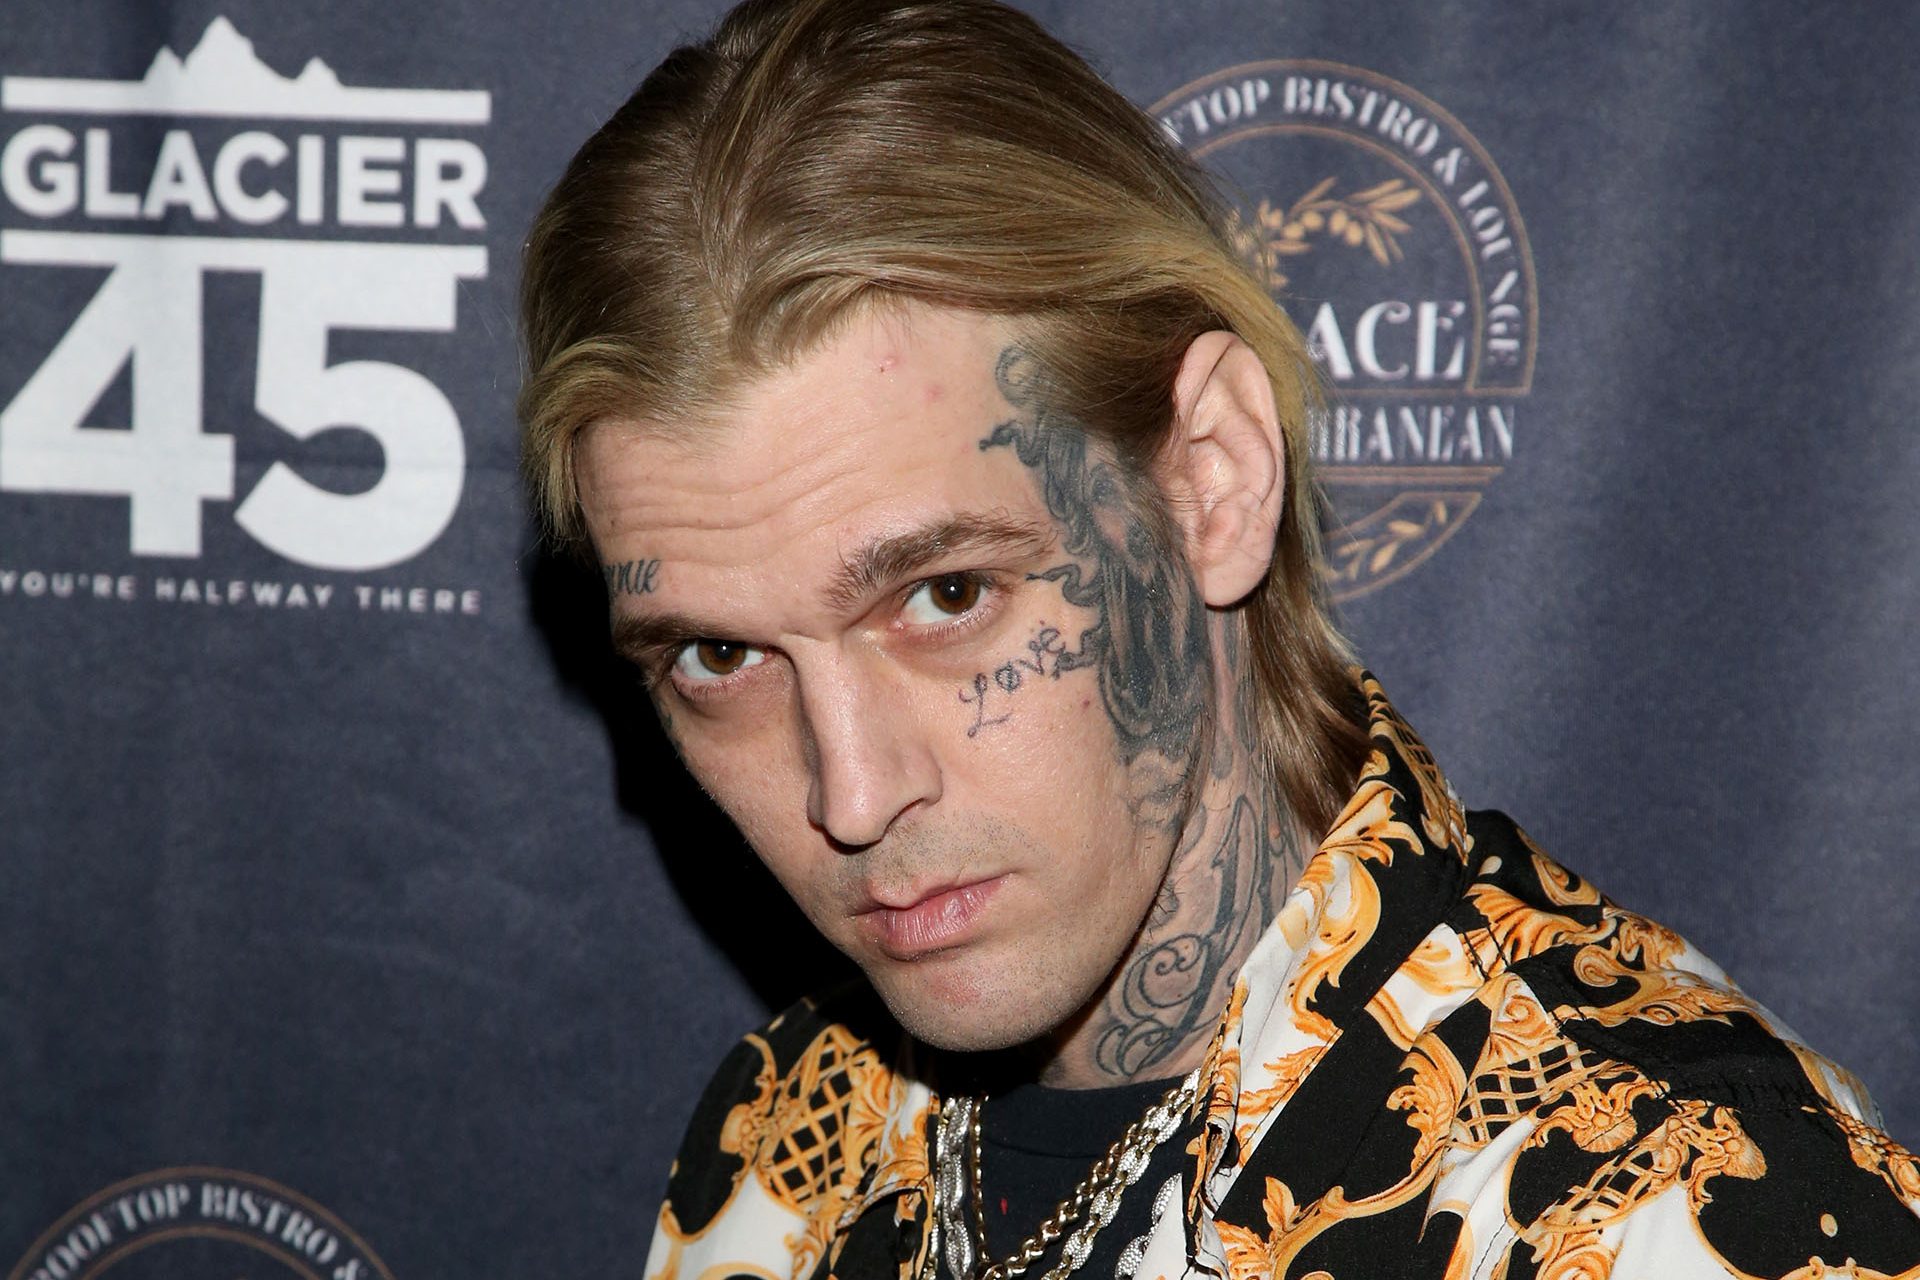 Aaron Carter: Nick Carter's troubled brother